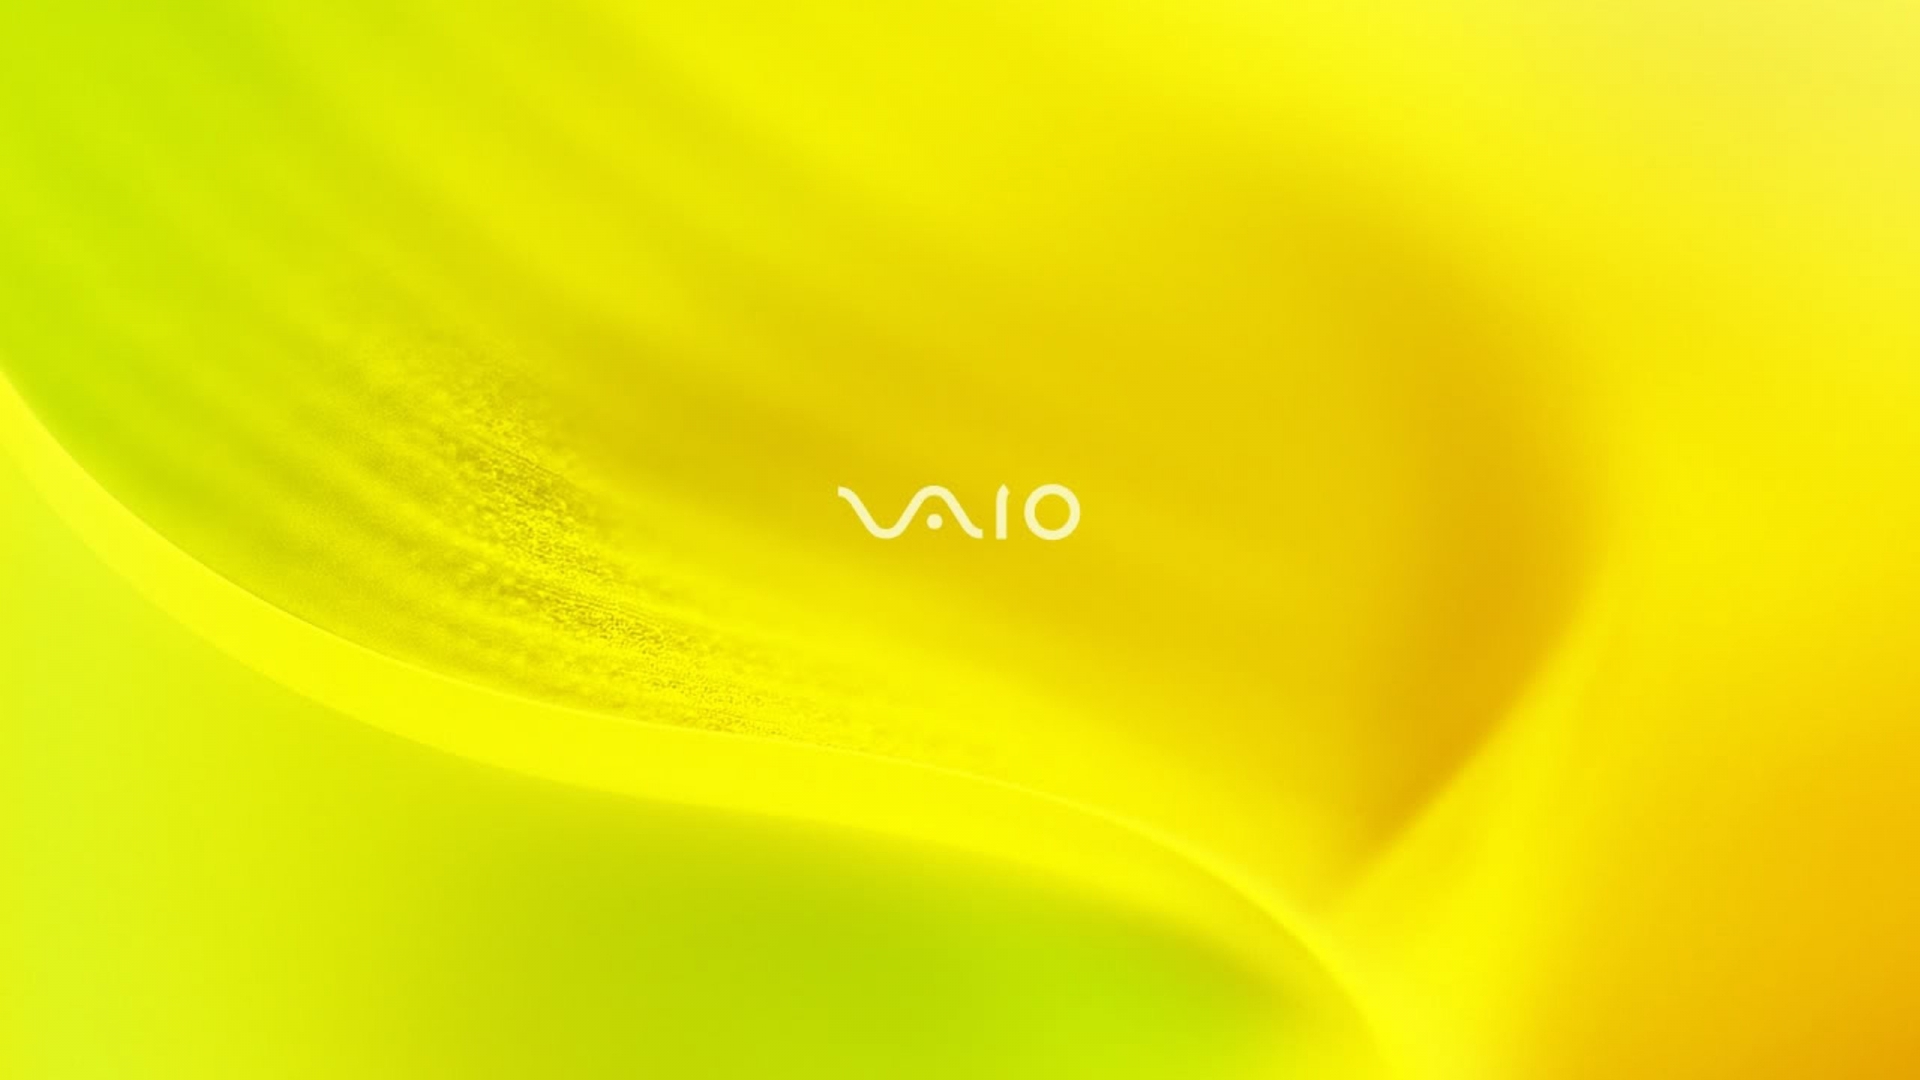 Sony VAIO Tender Yellow for 1920 x 1080 HDTV 1080p resolution